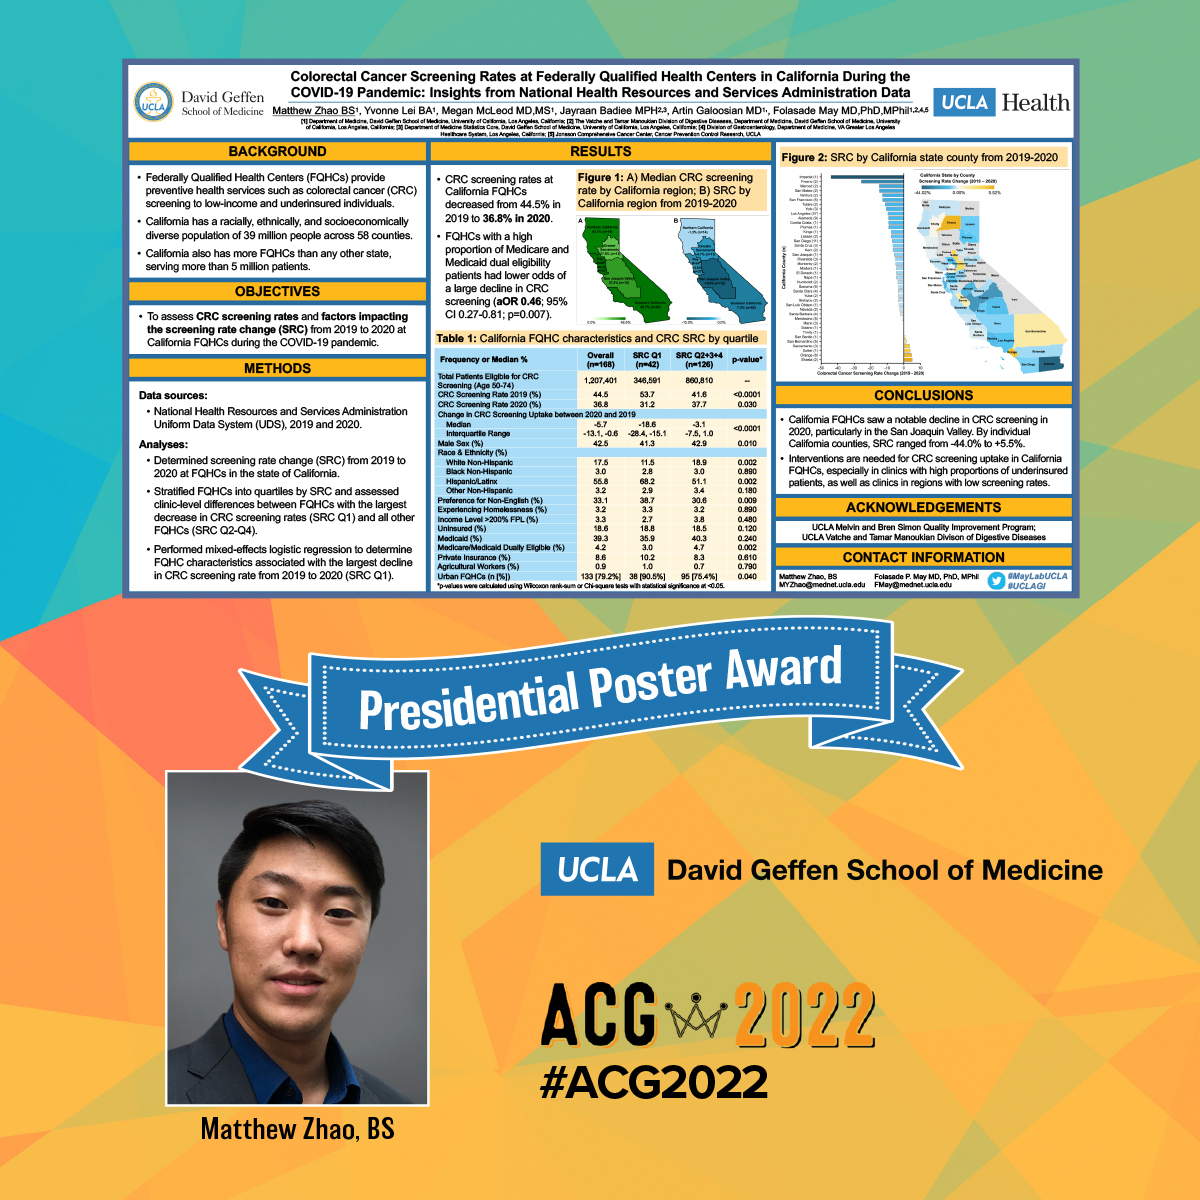 🏆#ACG2022 Presidential Poster Award - #CRC Screening Rates at Federally Qualified Health Centers in California During the #COVID-19 Pandemic

🌠@MatthewYZhao
👥Yvonne Lei @meganrmcleod Jayraan Badiee @DrGaloosianMD @drfolamay (#MayLabUCLA)

🗓️Tuesday, October 25
🕒3:00 - 5:00 pm